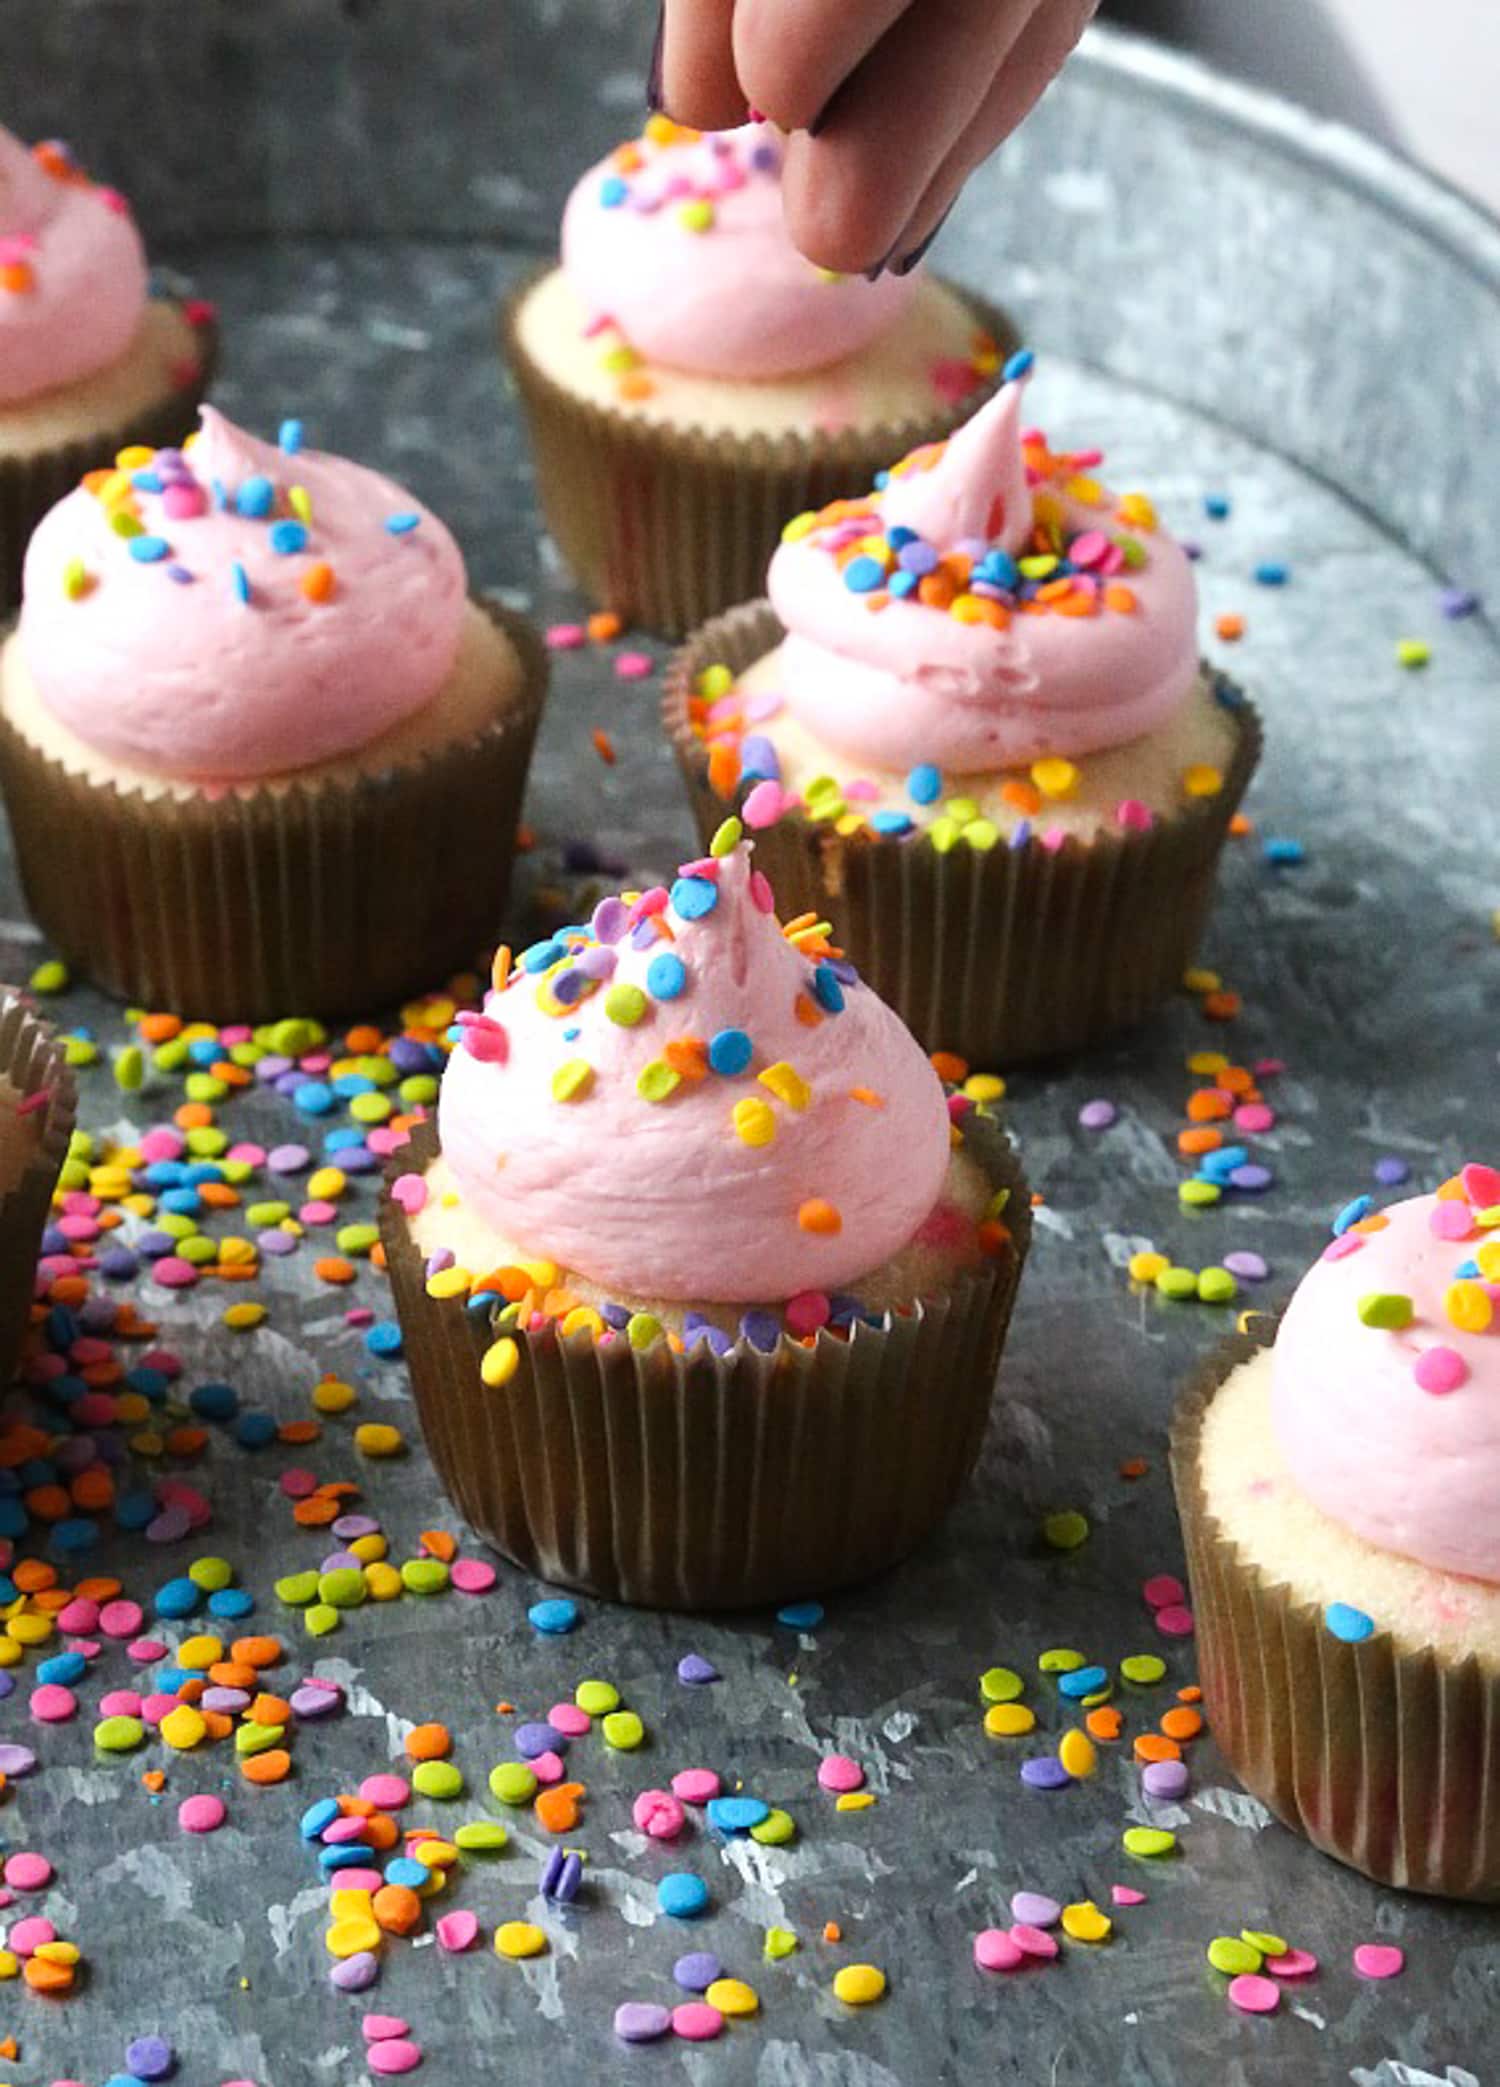 Scatter crumbles on a funfetti and sprinkle cupckae with pink buttercream